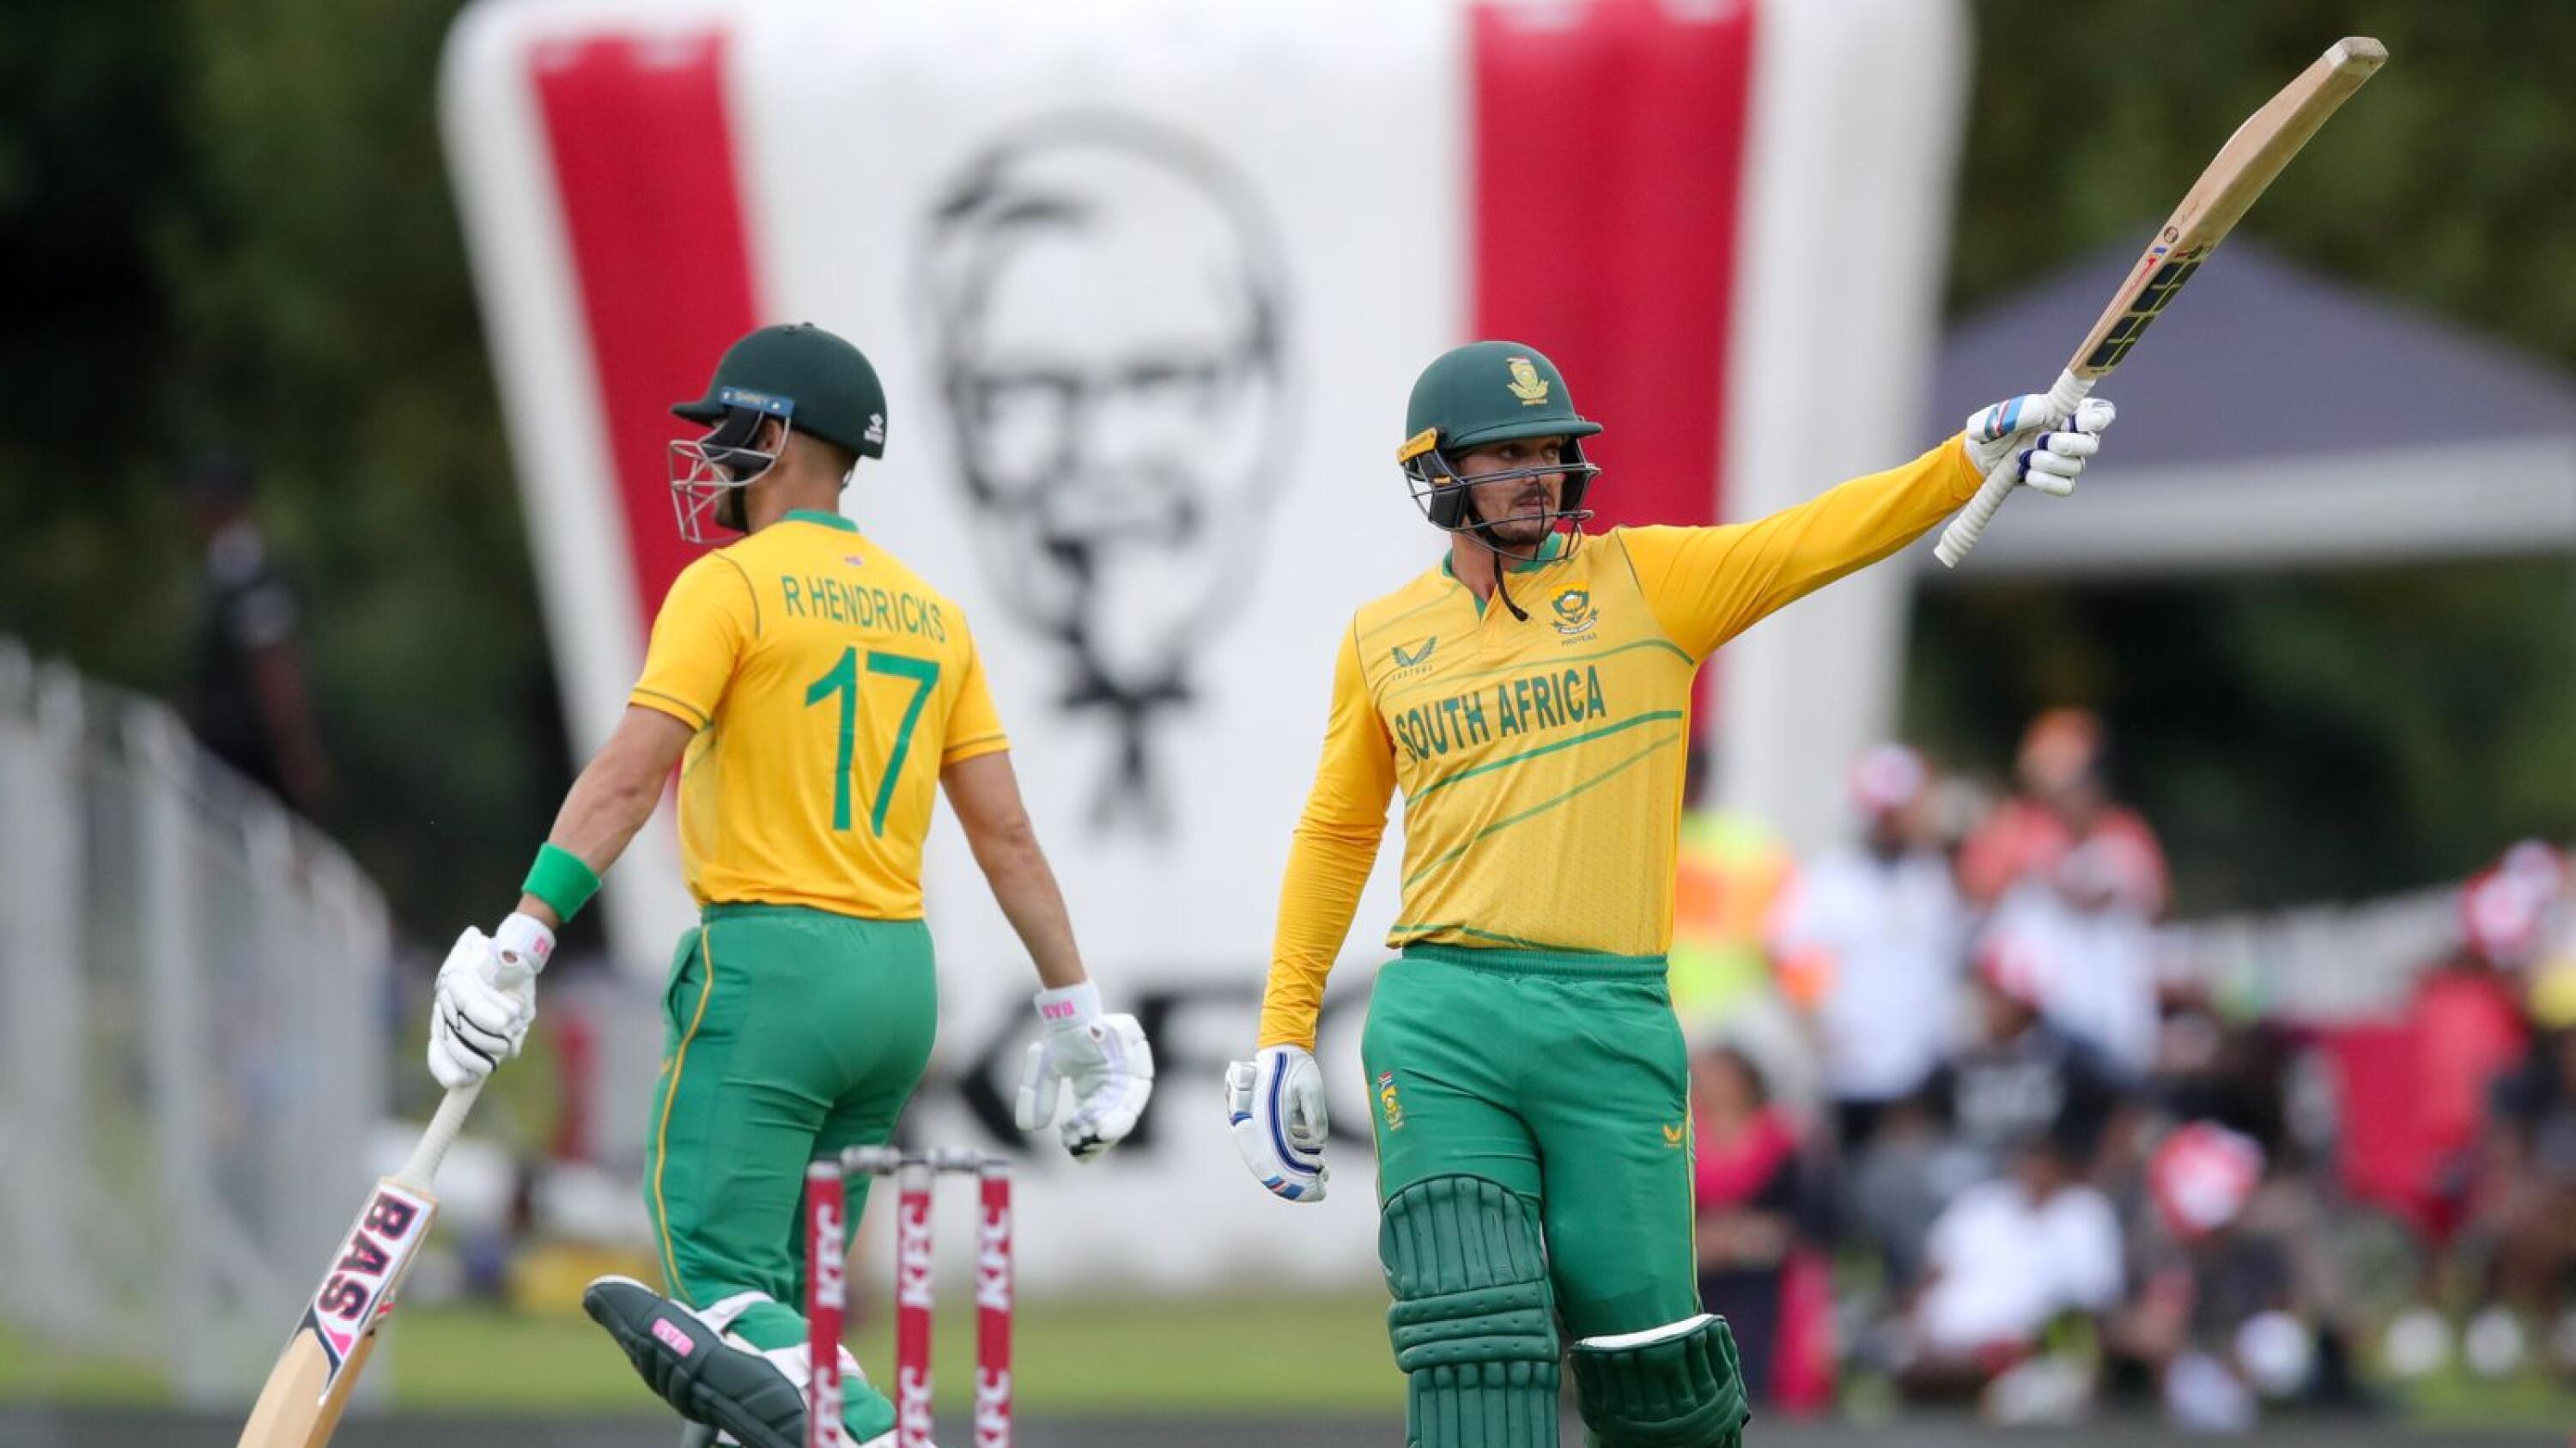 South Africa’s Quinton de Kock celebrates with Reeza Hendricks after reaching his 50 runs during the second T20I against the West Indies at SuperSport Park in Centurion on Sunday